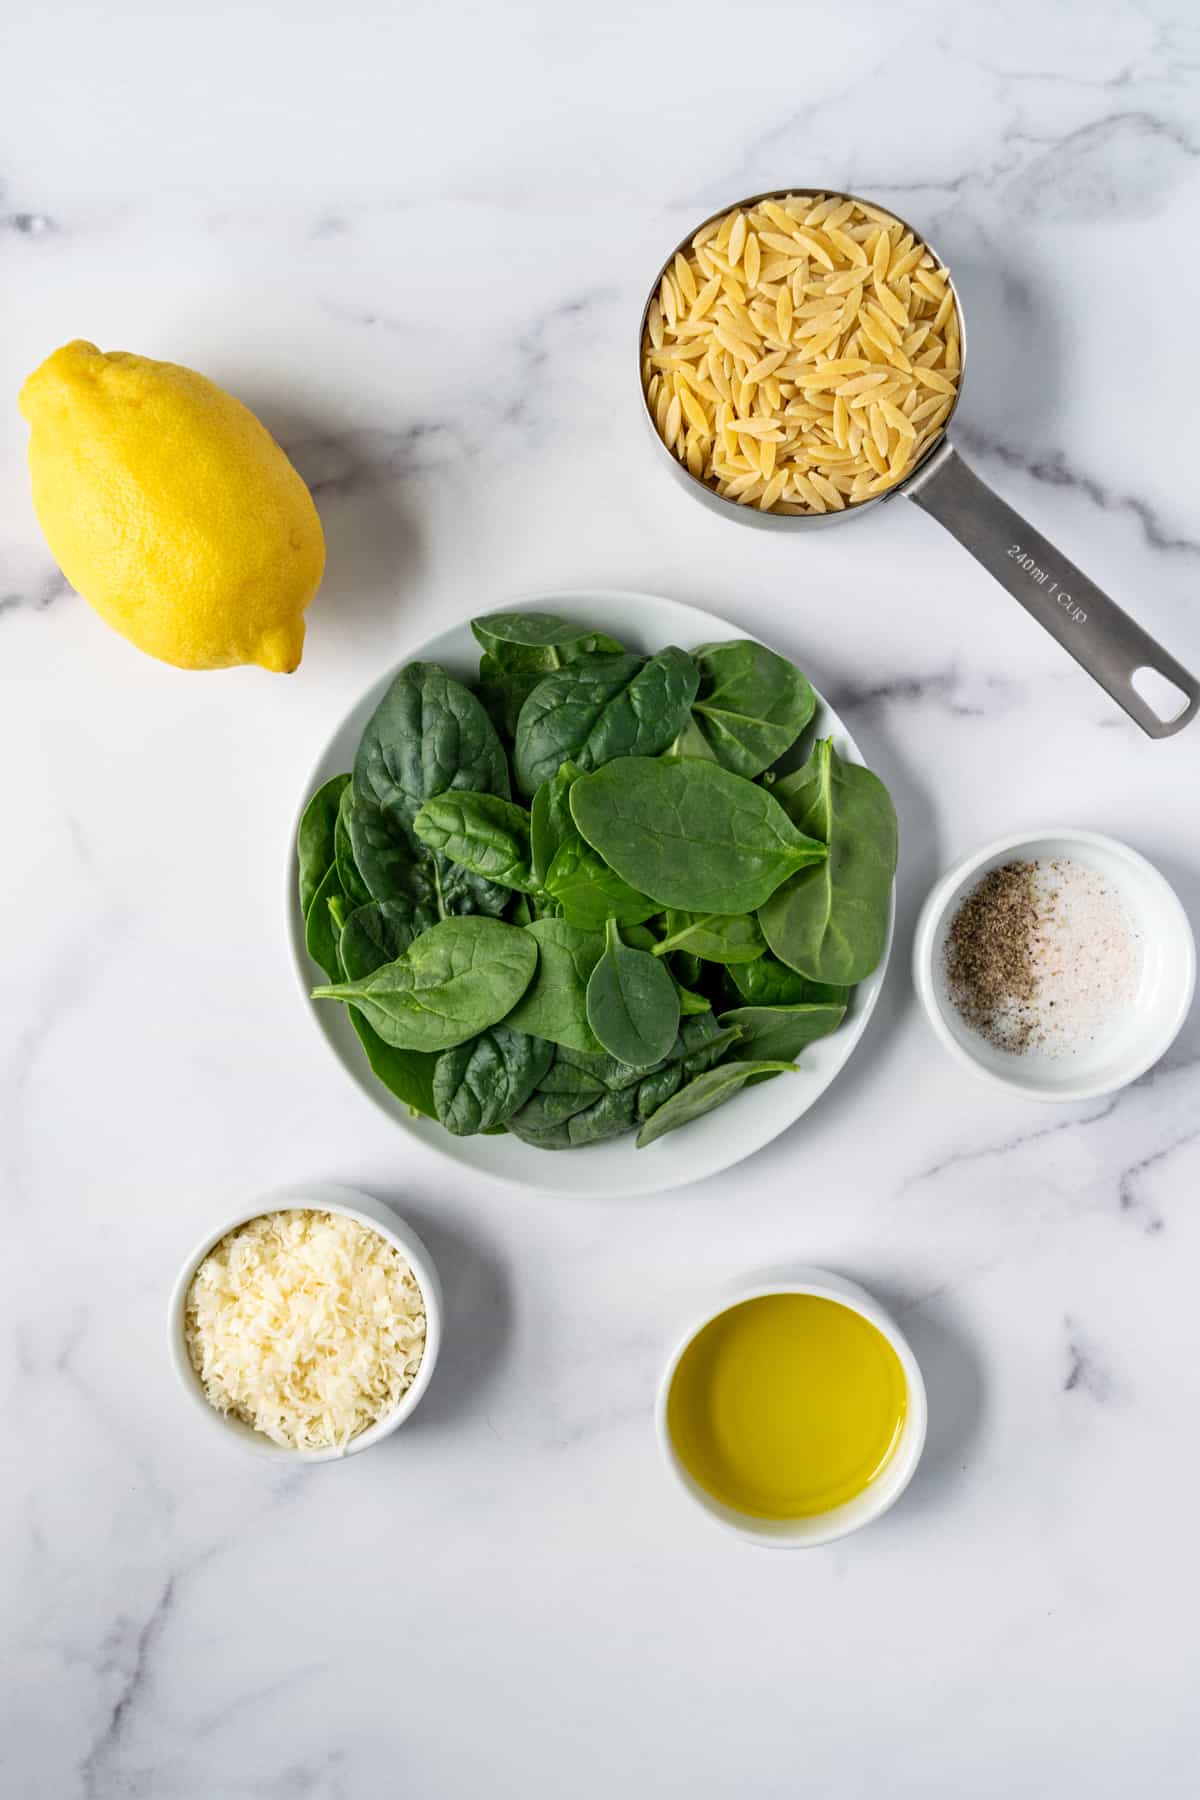 Lemon Orzo with Spinach ingredients including lemon, spinach, parmesan, olive oil, orzo, salt and pepper.